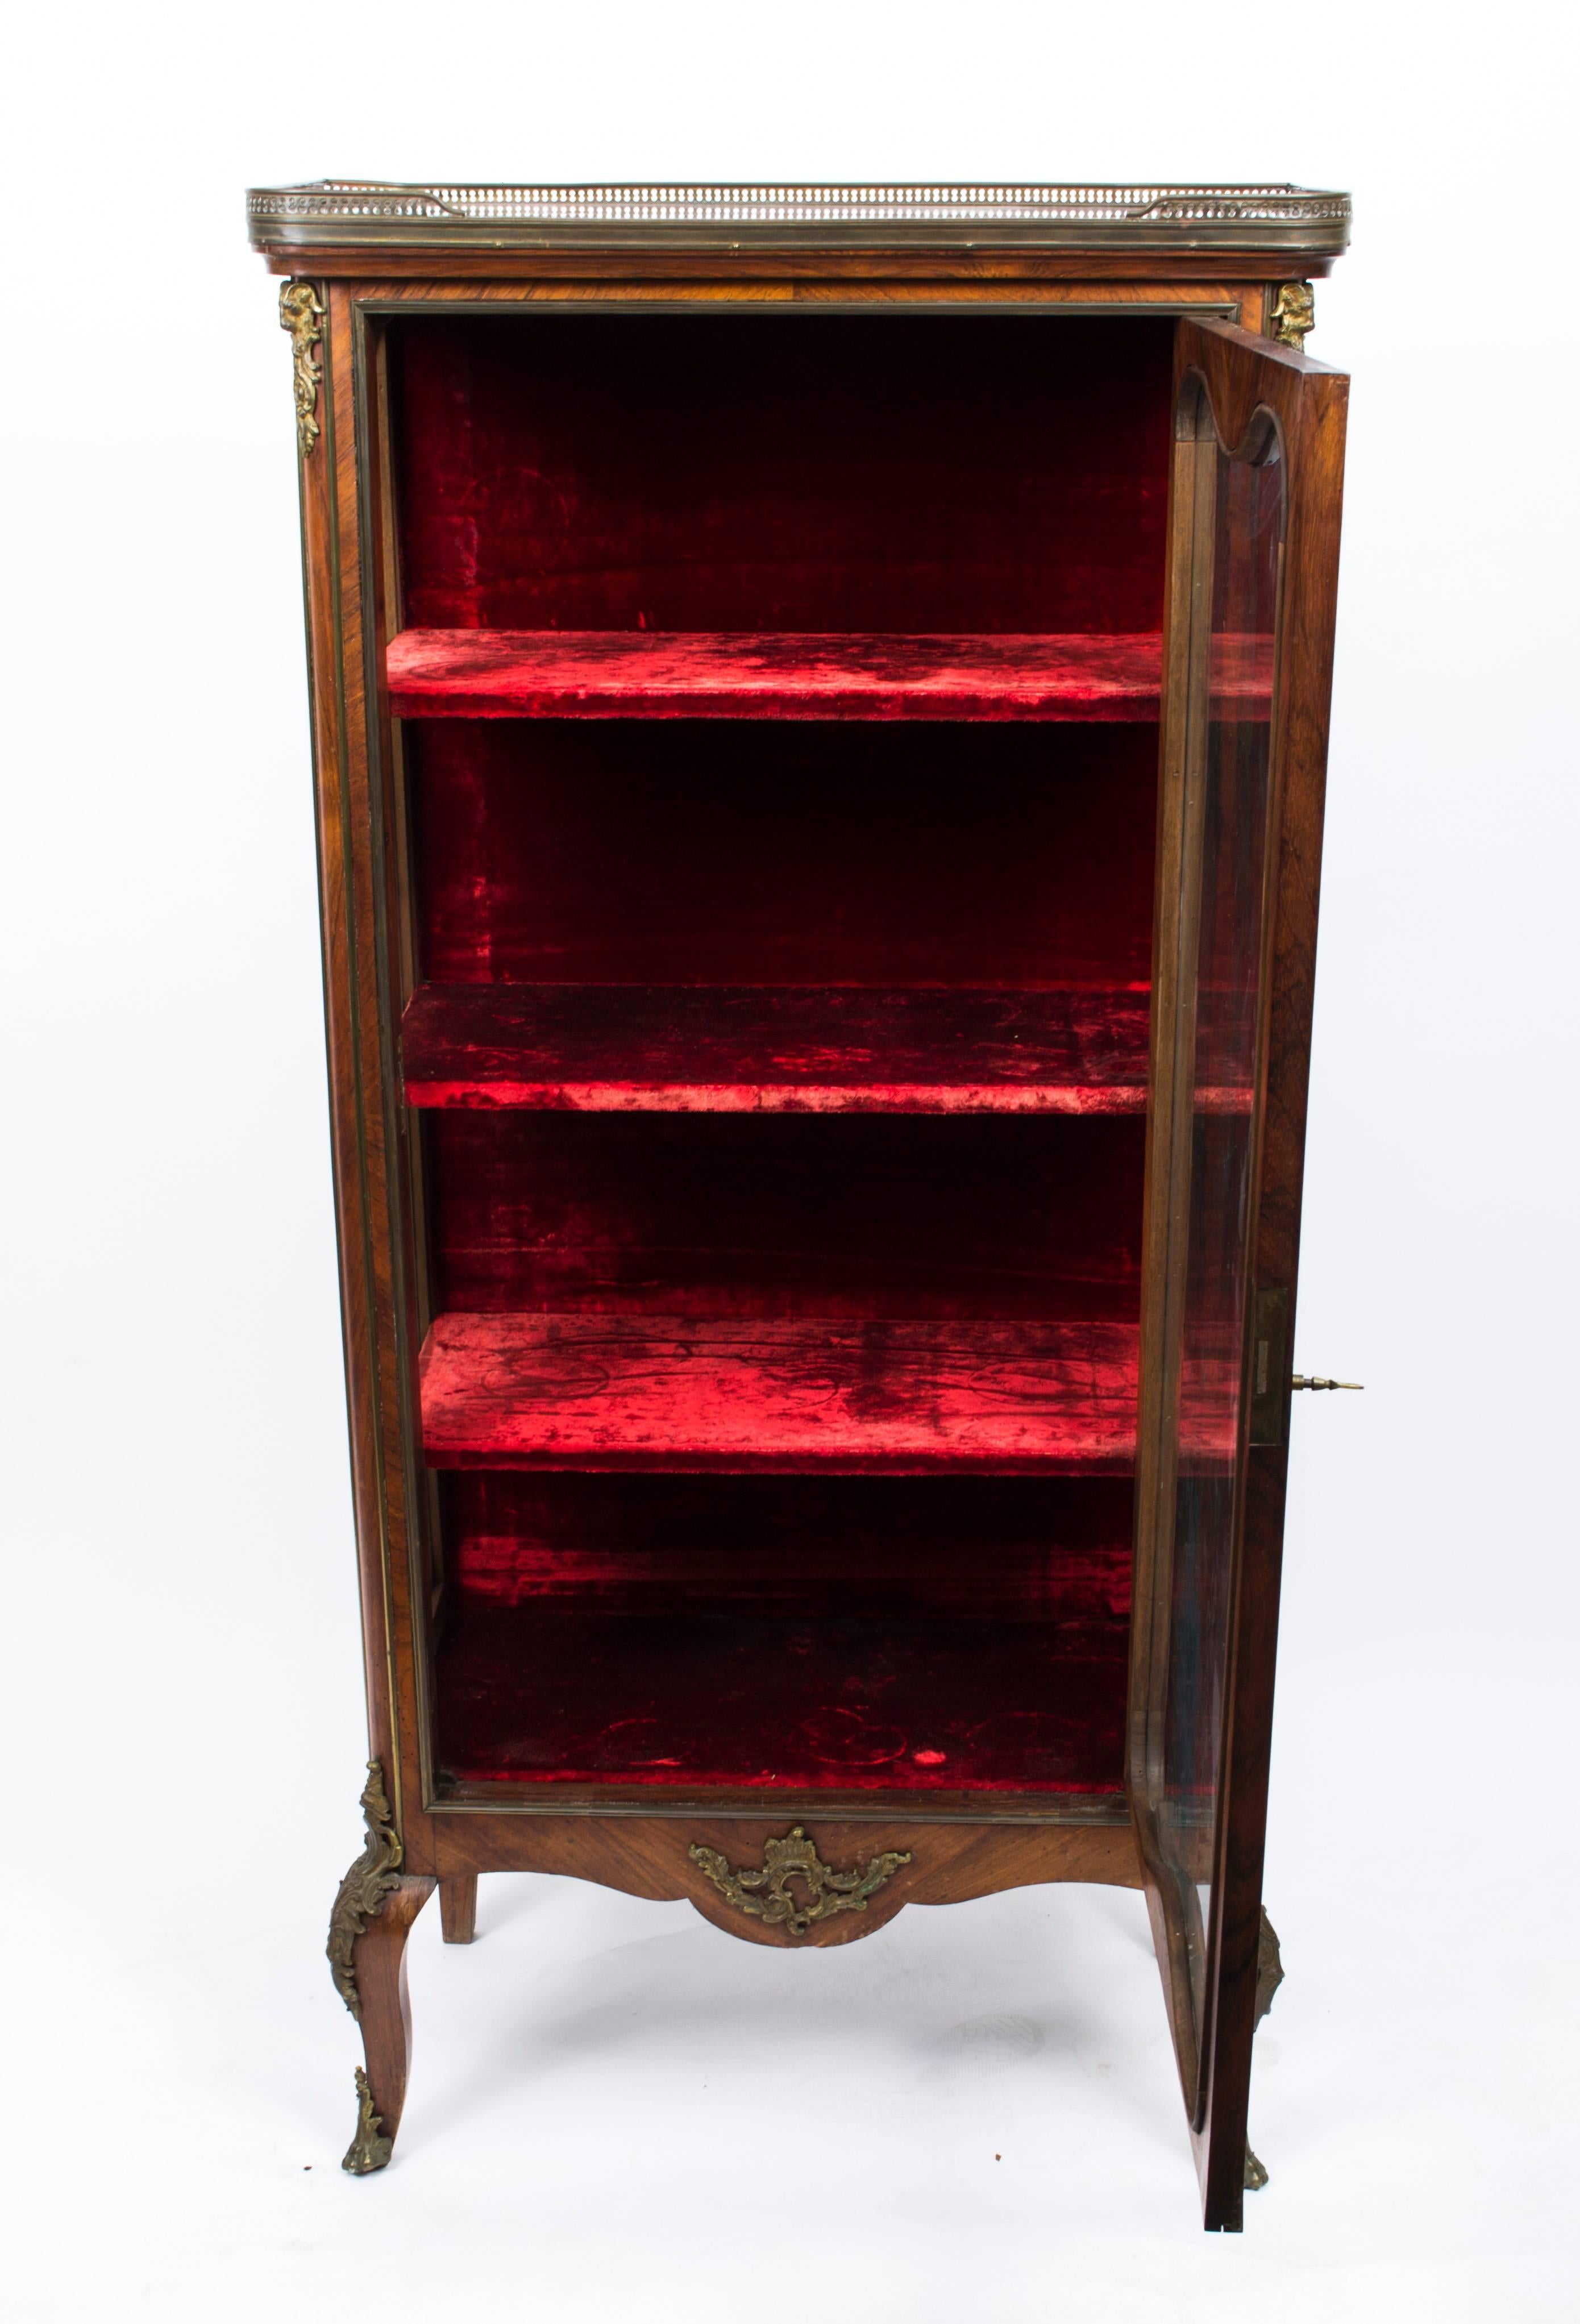 This is a beautiful antique French kingwood and ormolu-mounted display cabinet in the French Louis XV manner, circa 1880 in date.

This beautiful cabinet has superb floral marquetry decoration and an abundance of exquisite ormolu mounts.

It has